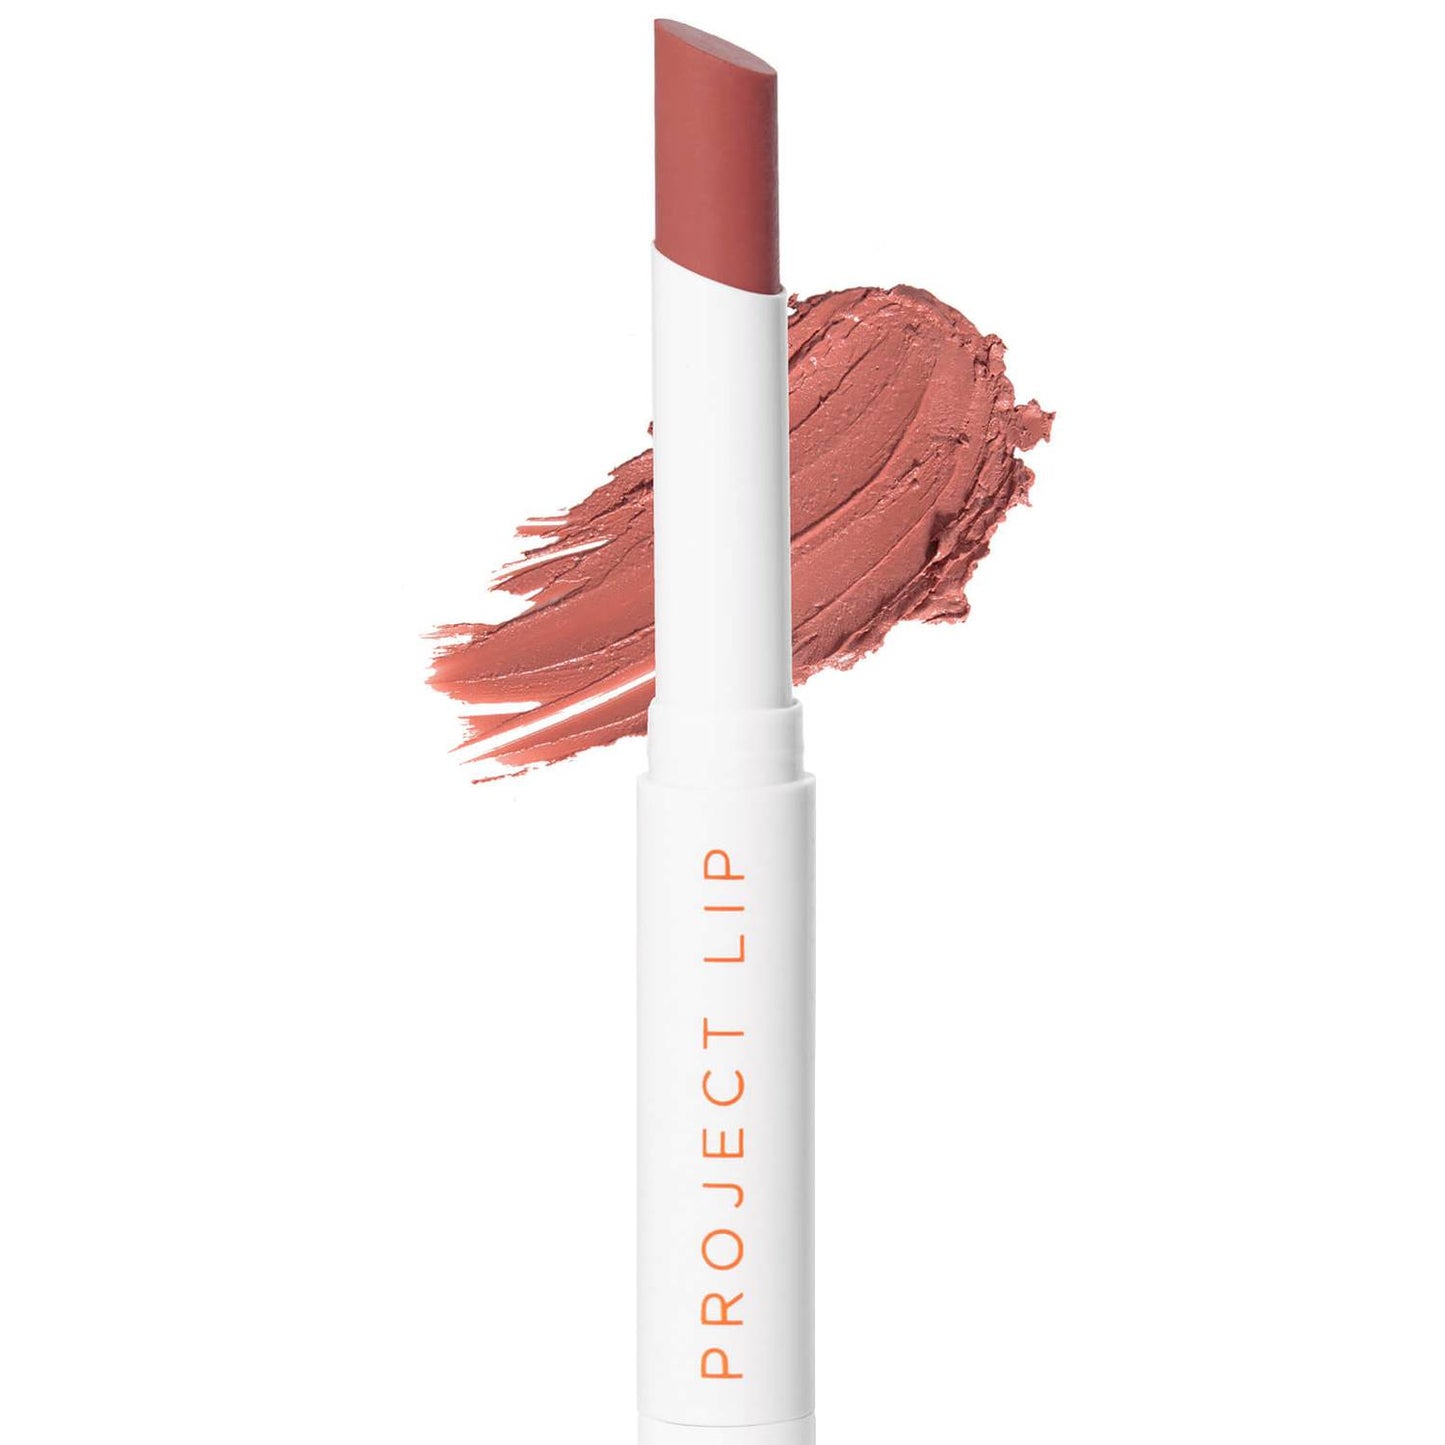 Plump en Colour Plumping Balm - Dare (Pink/Brown) by Project Lip Cosmetics